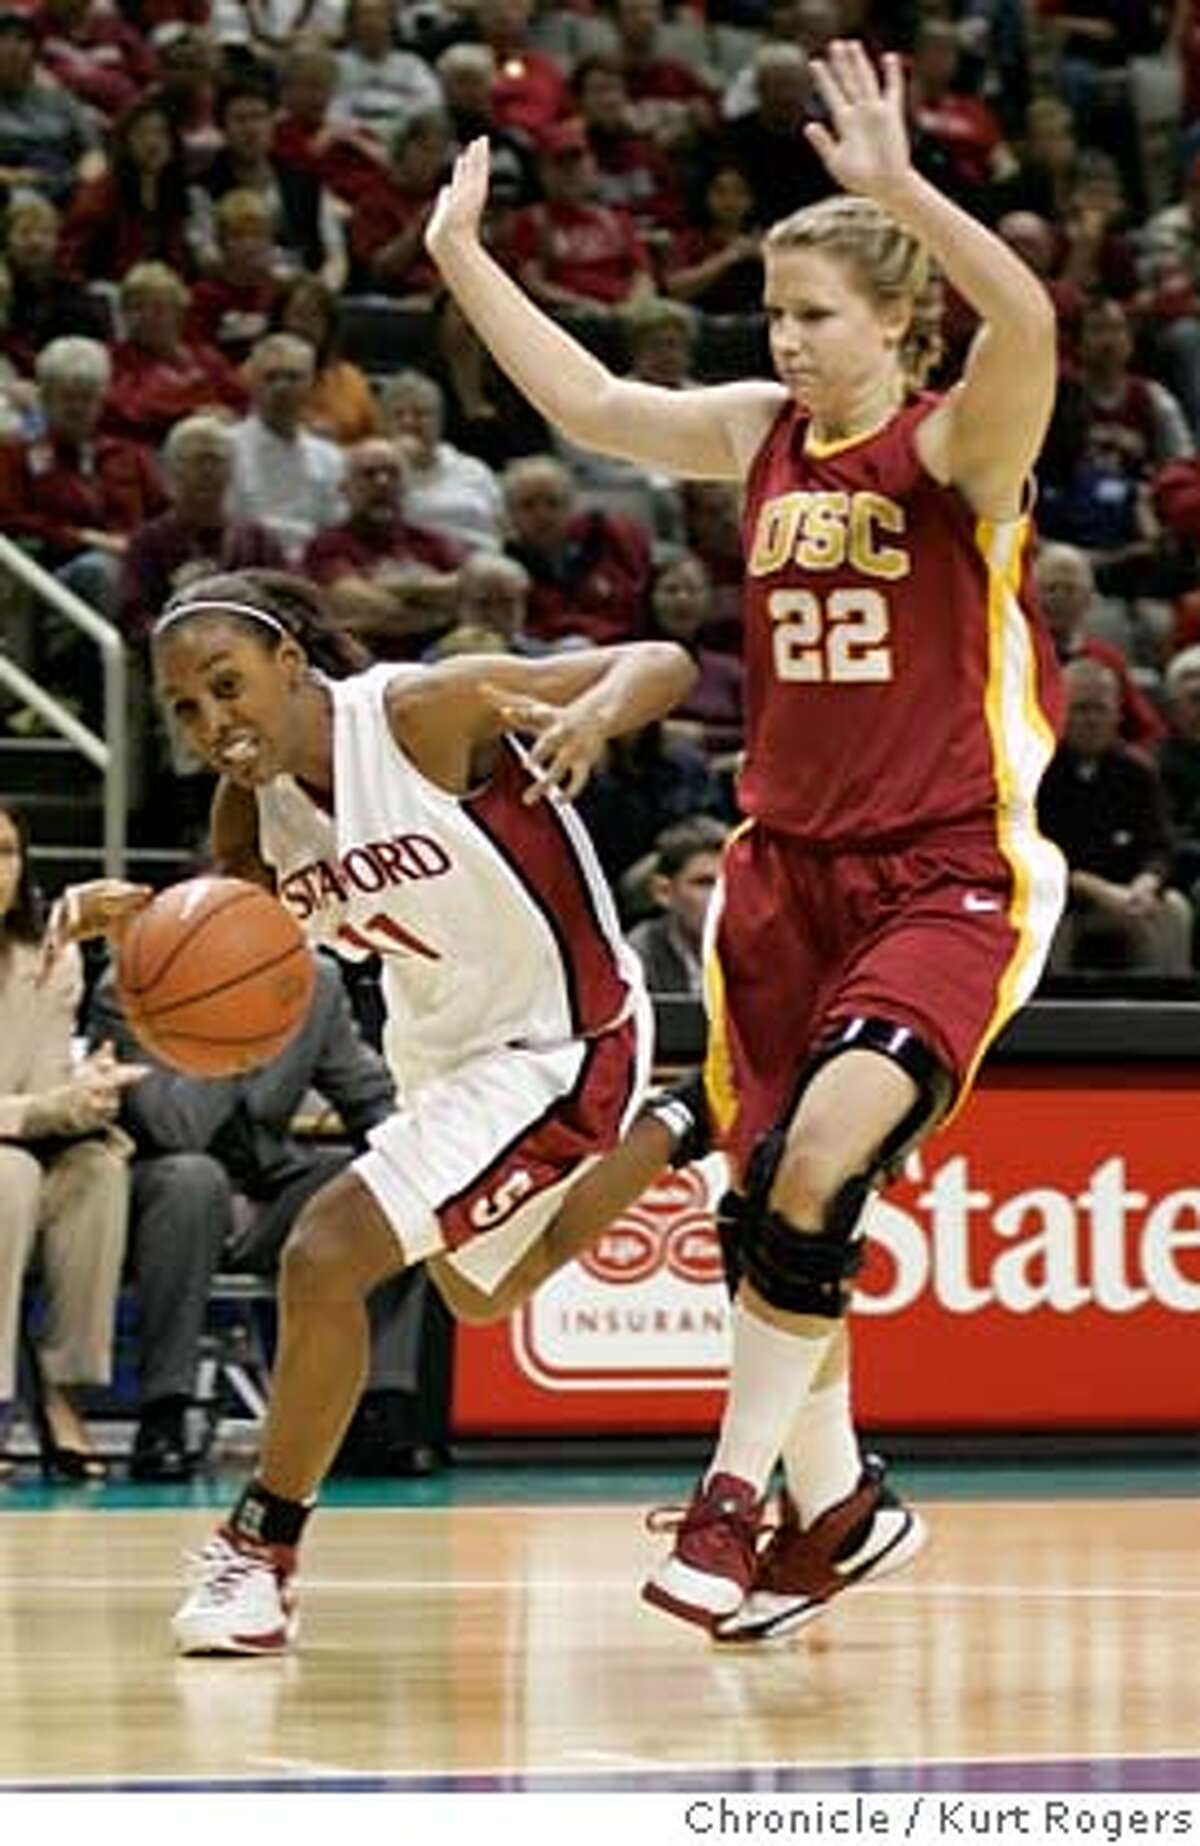 Candice Wiggins is fouled in the first half by USC's Allison Jaskowiak. 2007 PAC-10 Women's Basketball Tournament at HP Pavilion Game 8 No.1 Stanford Vs No 5 USC SUNDAY, MARCH 04, 2007 KURT ROGERS/THE CHRONICLE SAN JOSE THE CHRONICLE SFC